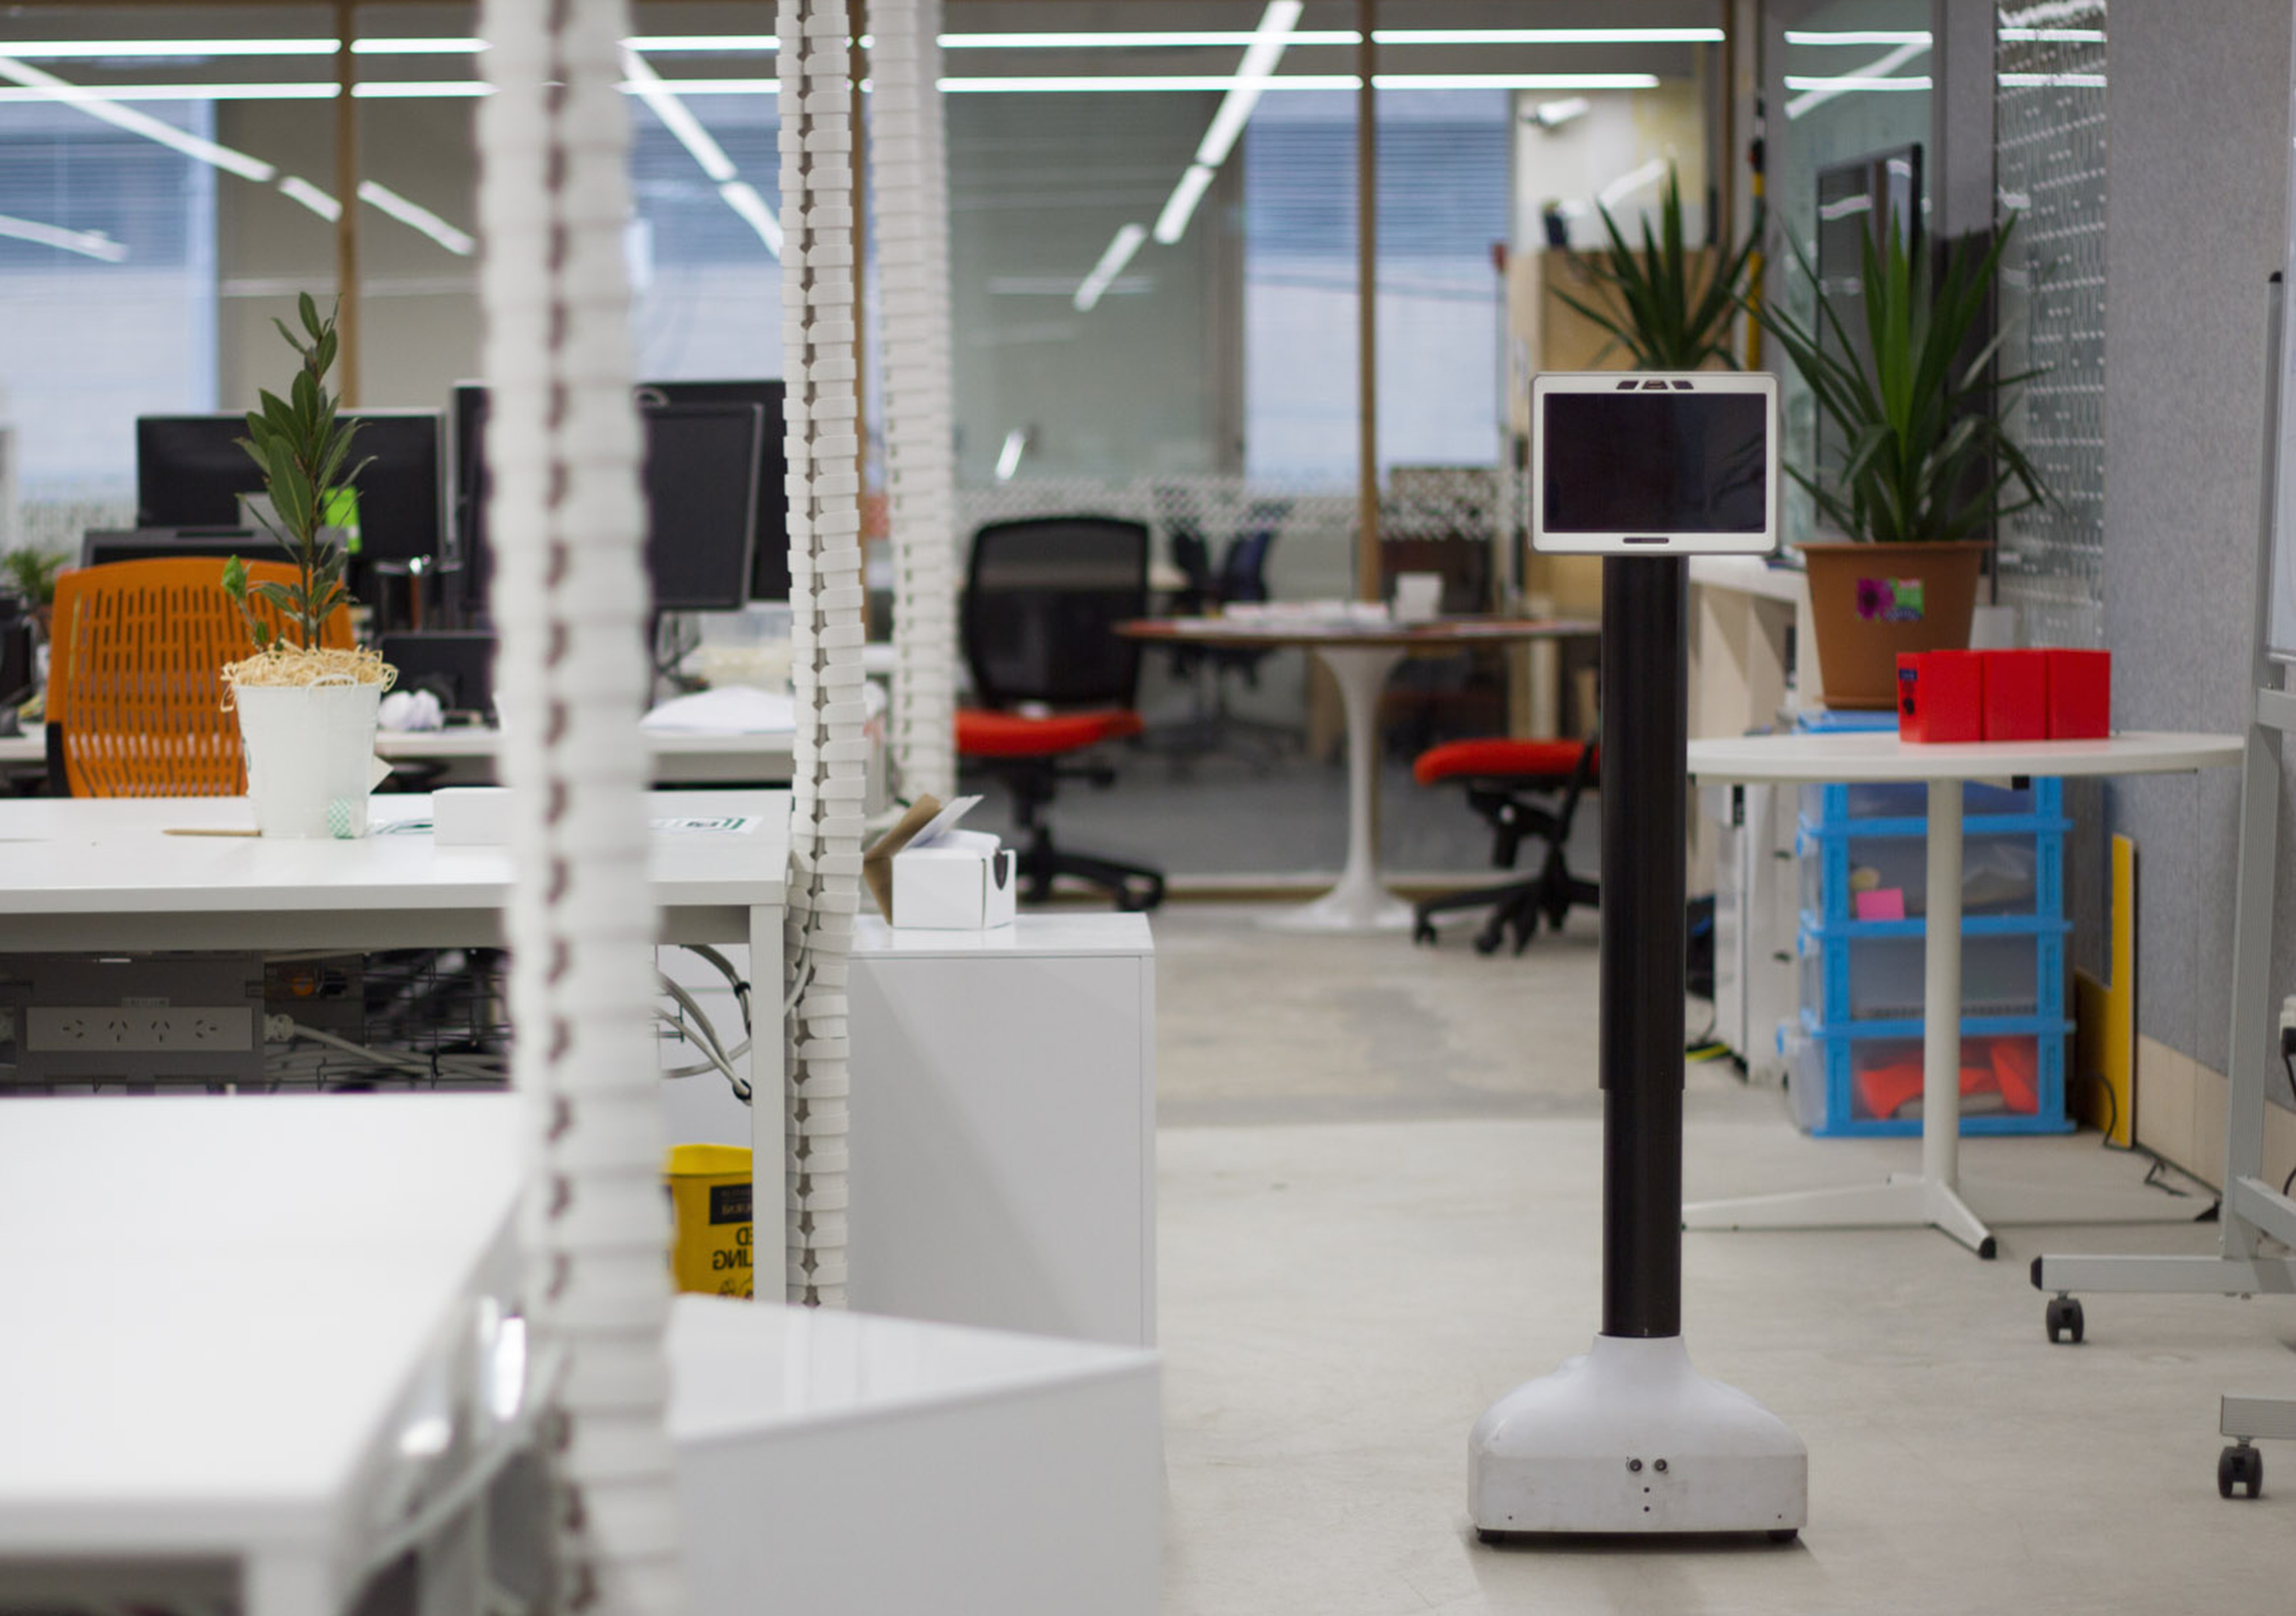 The Teleport teleconferencing robot developed by Aubot. Photo: Handout